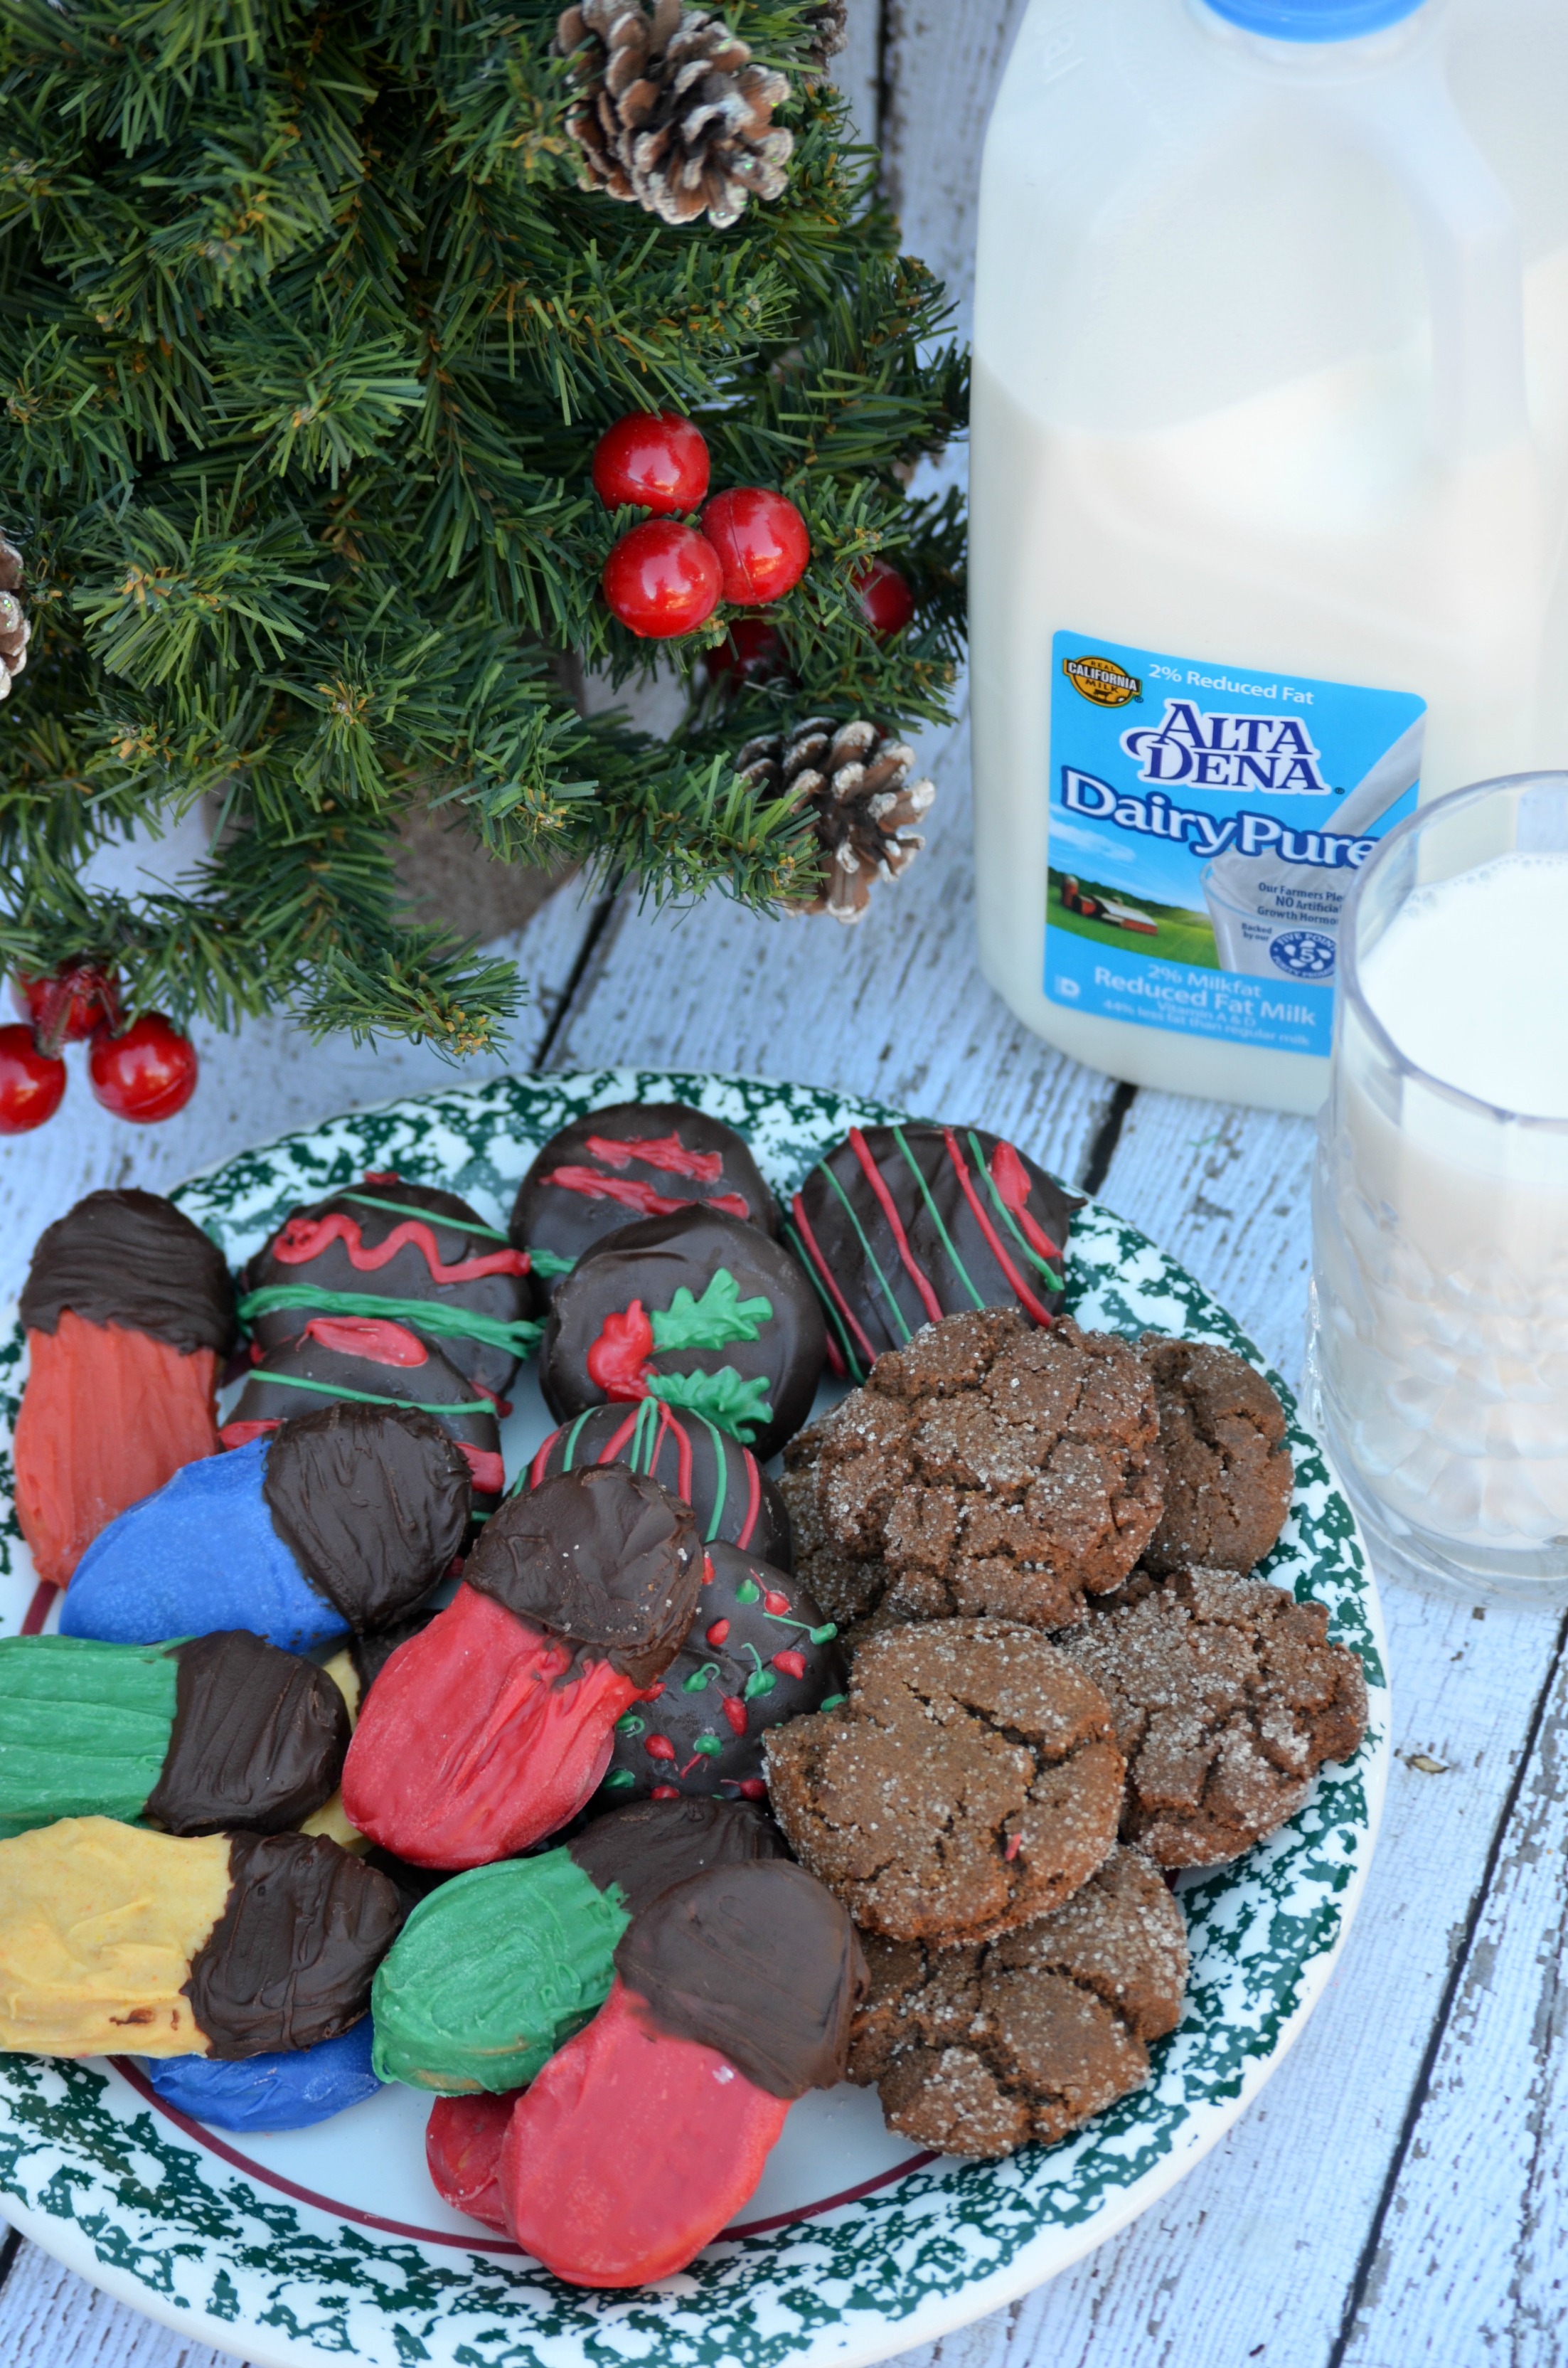 5 Simple Holiday Cookie Recipes | Perfect to enjoy with a tall glass of #dairypure milk. #pureandsimple AD